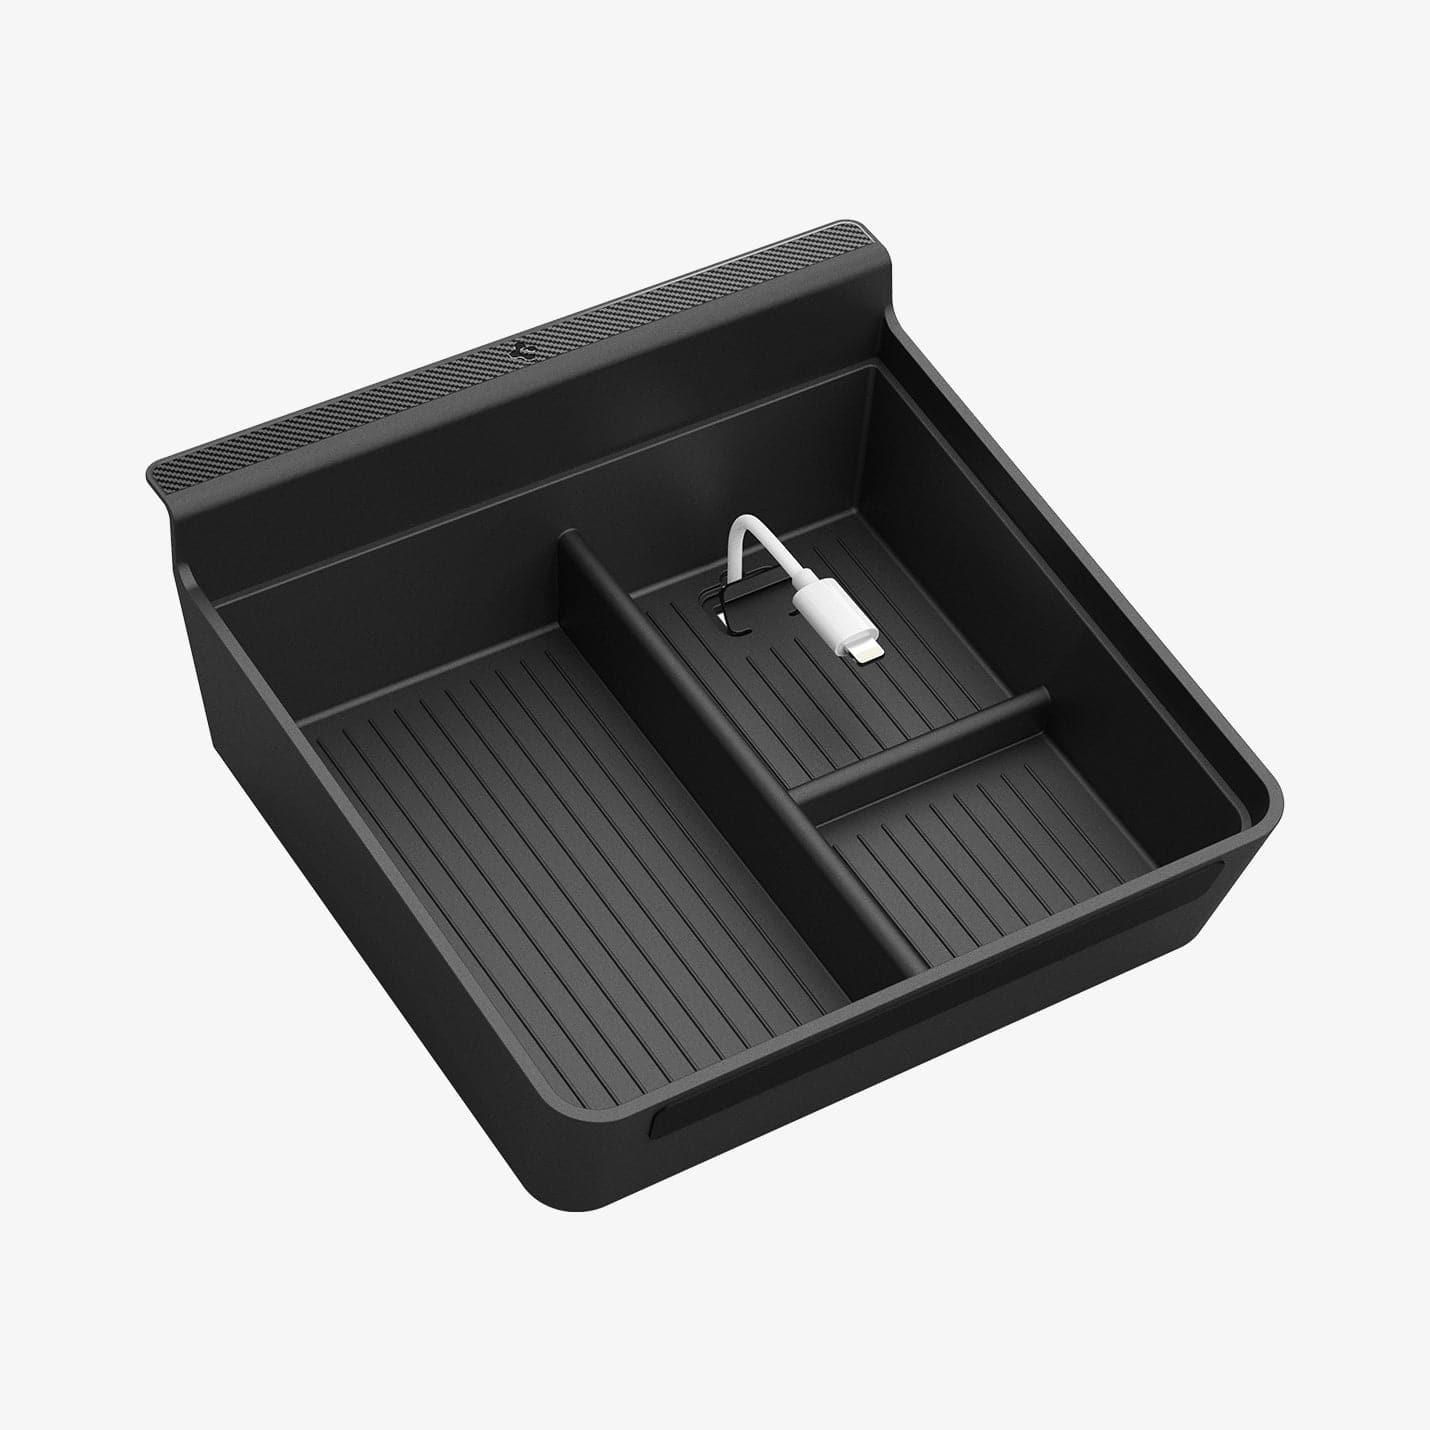 ACP06952 - Tesla Model S & X Center Console Organizer Tray in black showing the top and side view with charging cable sticking out of slot